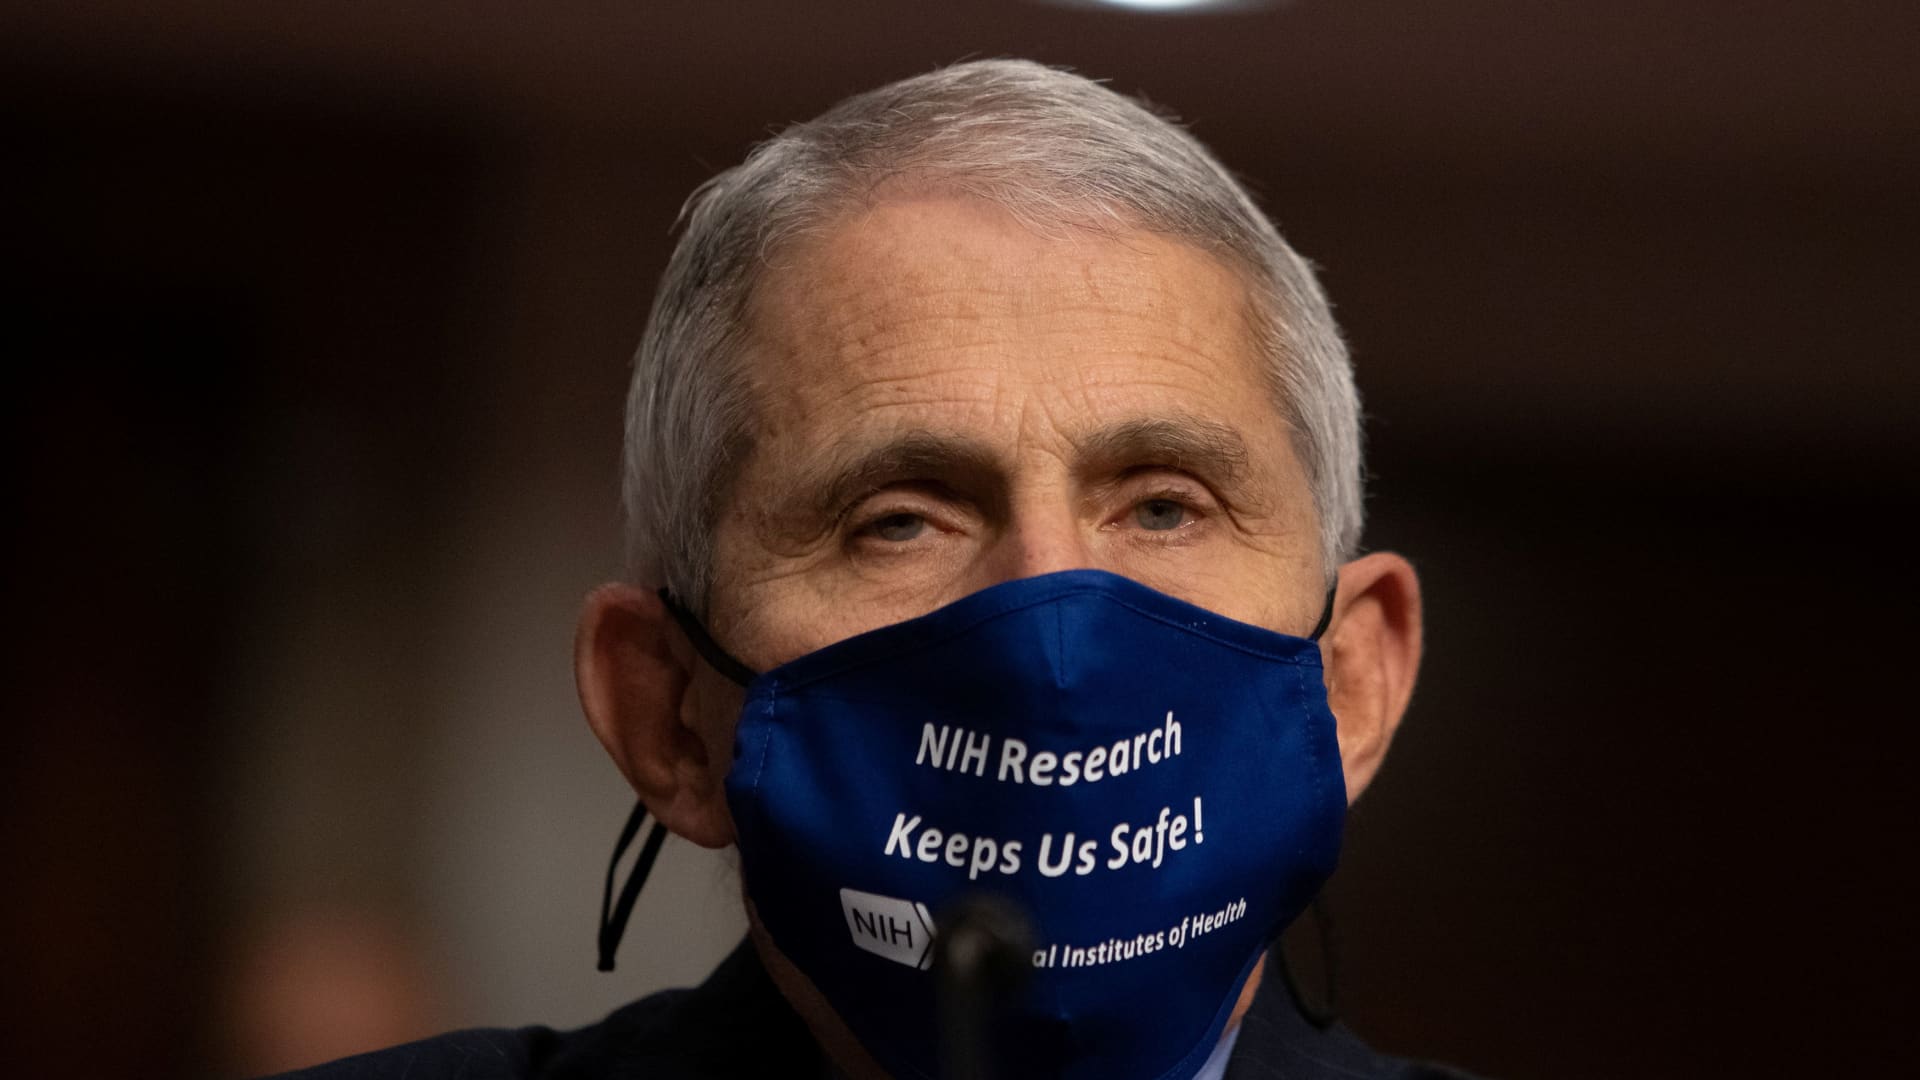 Anthony Fauci, MD, Director, National Institute of Allergy and Infectious Diseases, National Institutes of Health, looks on before testifying at a U.S. Senate Senate Health, Education, Labor, and Pensions Committee Hearing to examine COVID-19, focusing on an update on the federal response at the U.S. Capitol Washington, D.C., U.S., September 23, 2020.